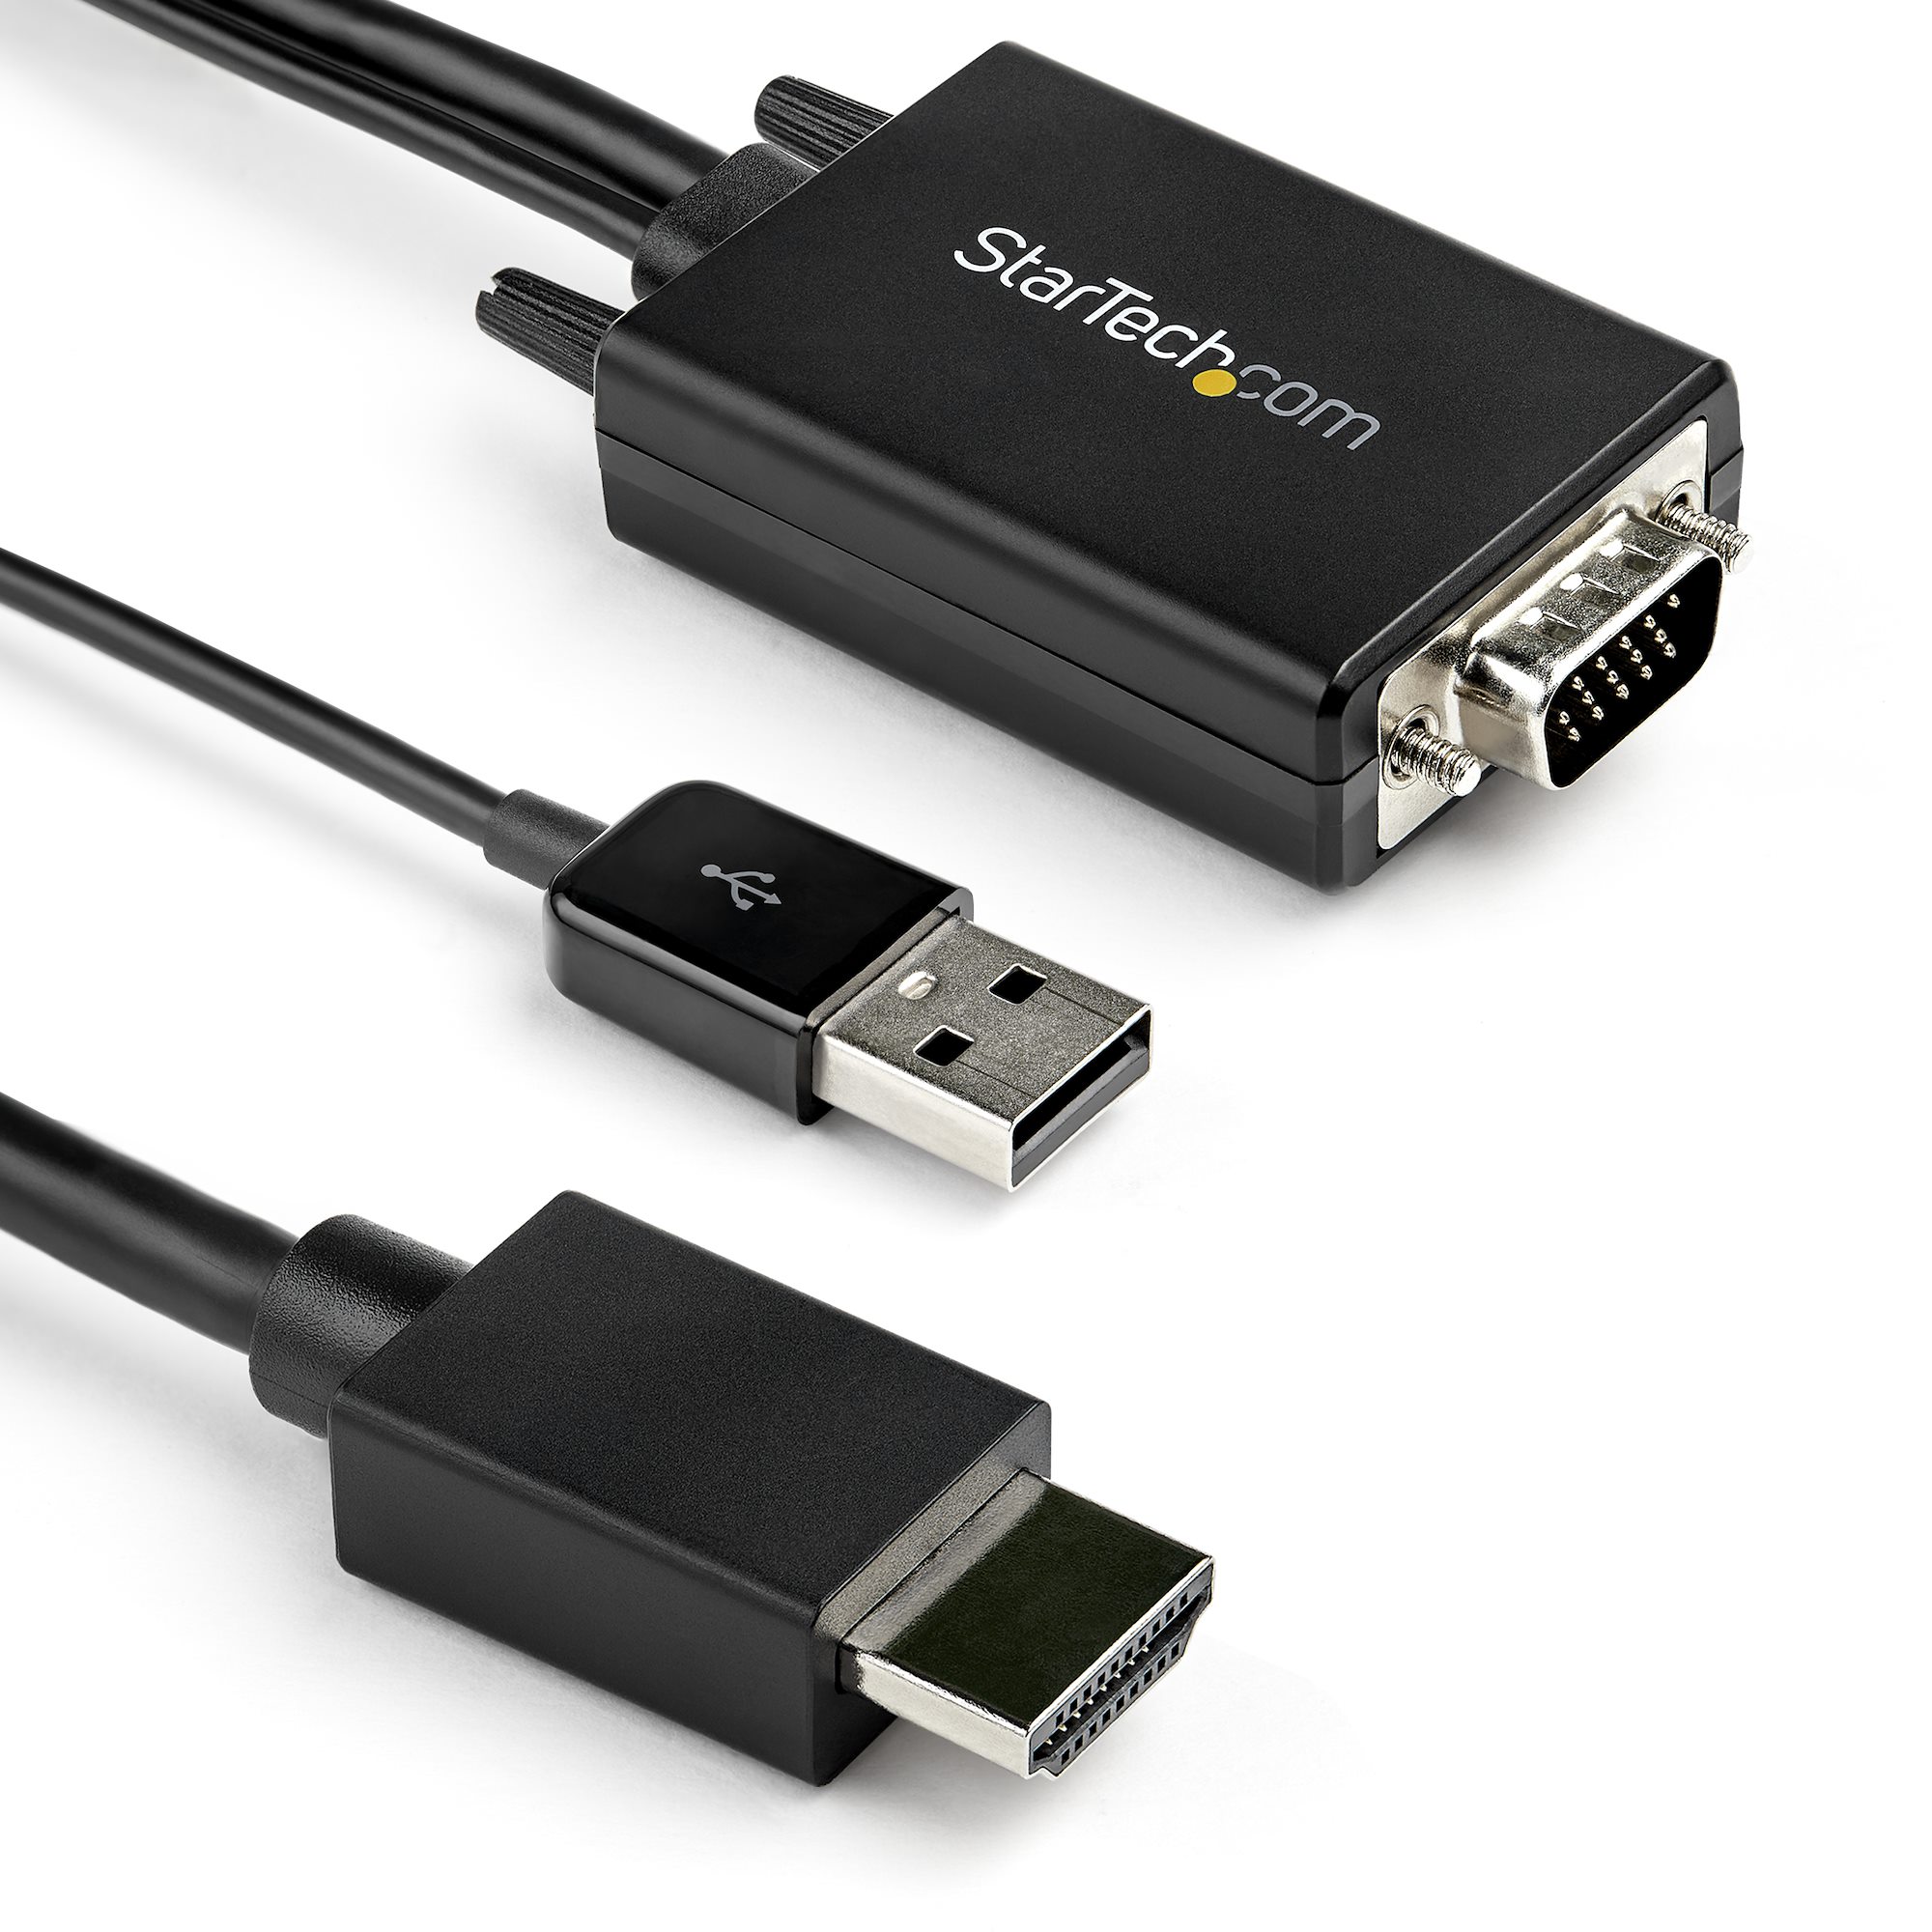 3m to HDMI Converter Cable Adapter - Video Converters | StarTech.com